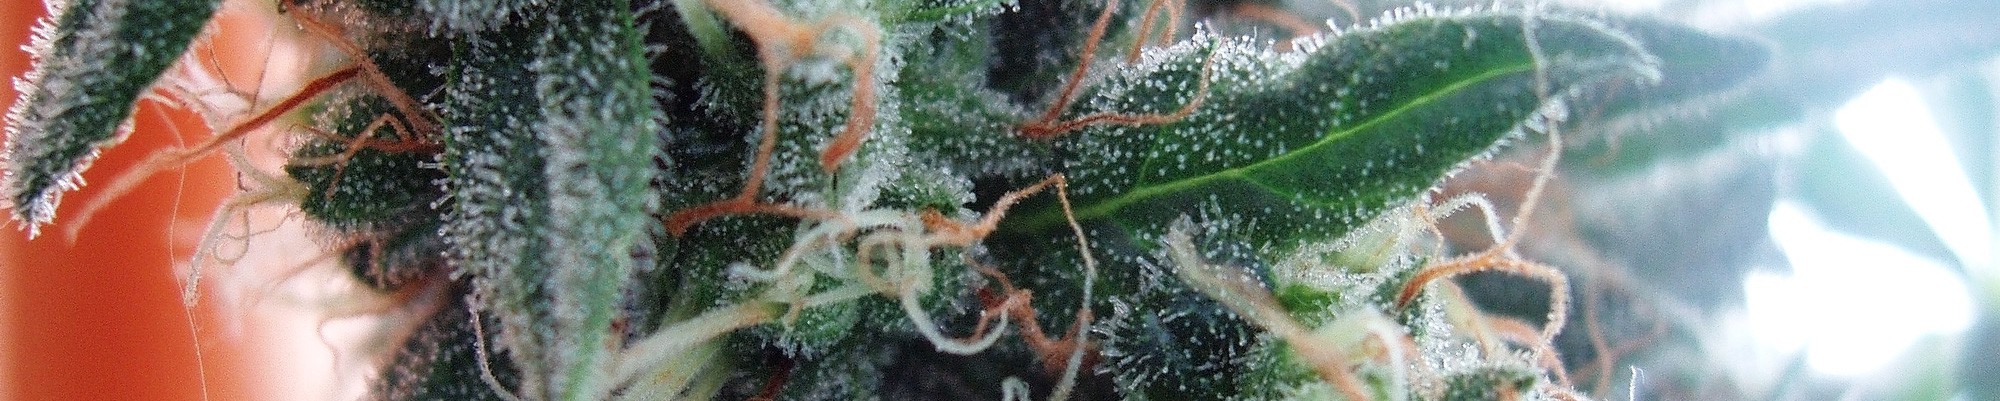 A close-up picture of a marijuana plant.